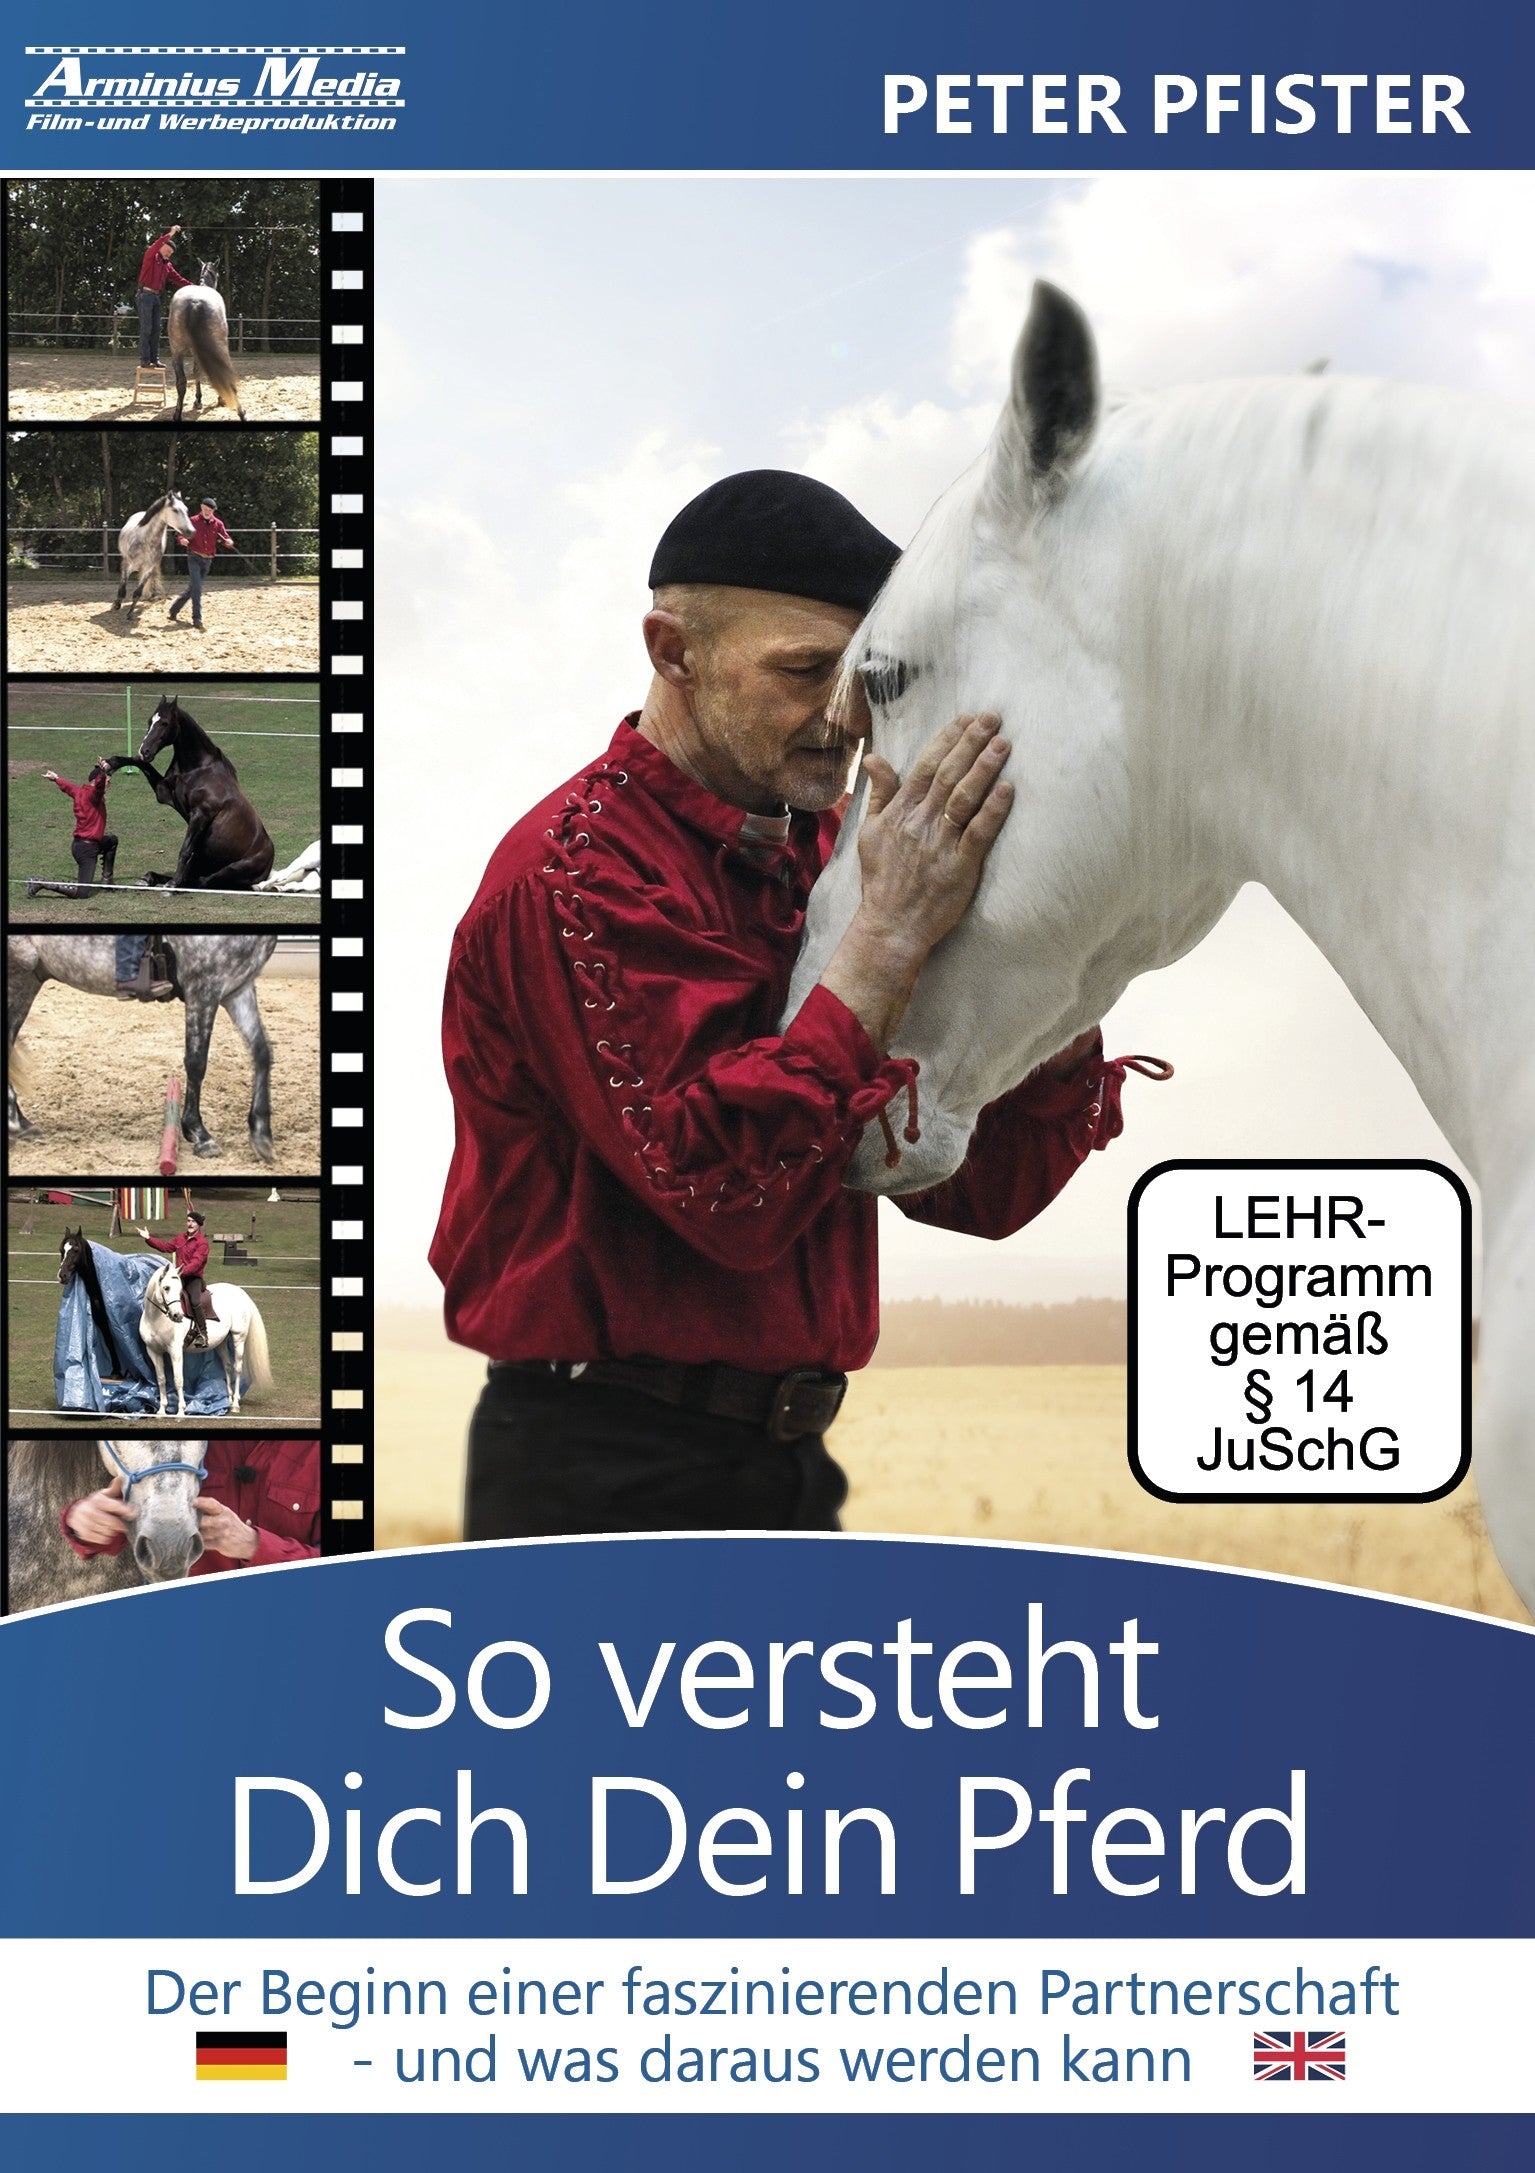 Instructional video DVD “How your horse understands you” with Peter Pfister